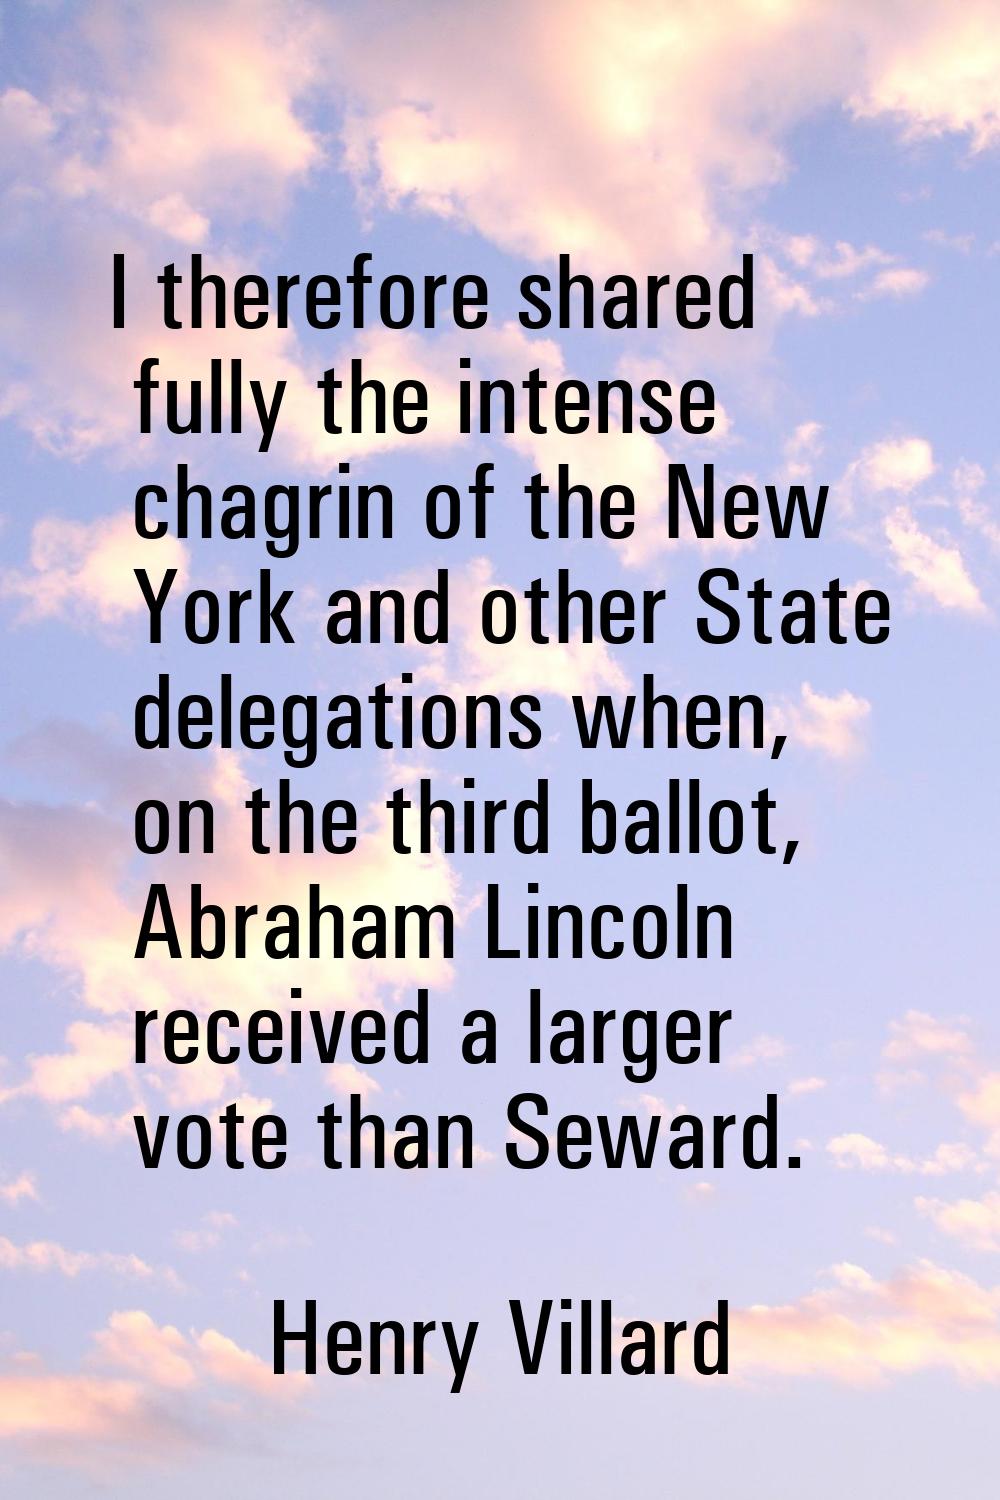 I therefore shared fully the intense chagrin of the New York and other State delegations when, on t